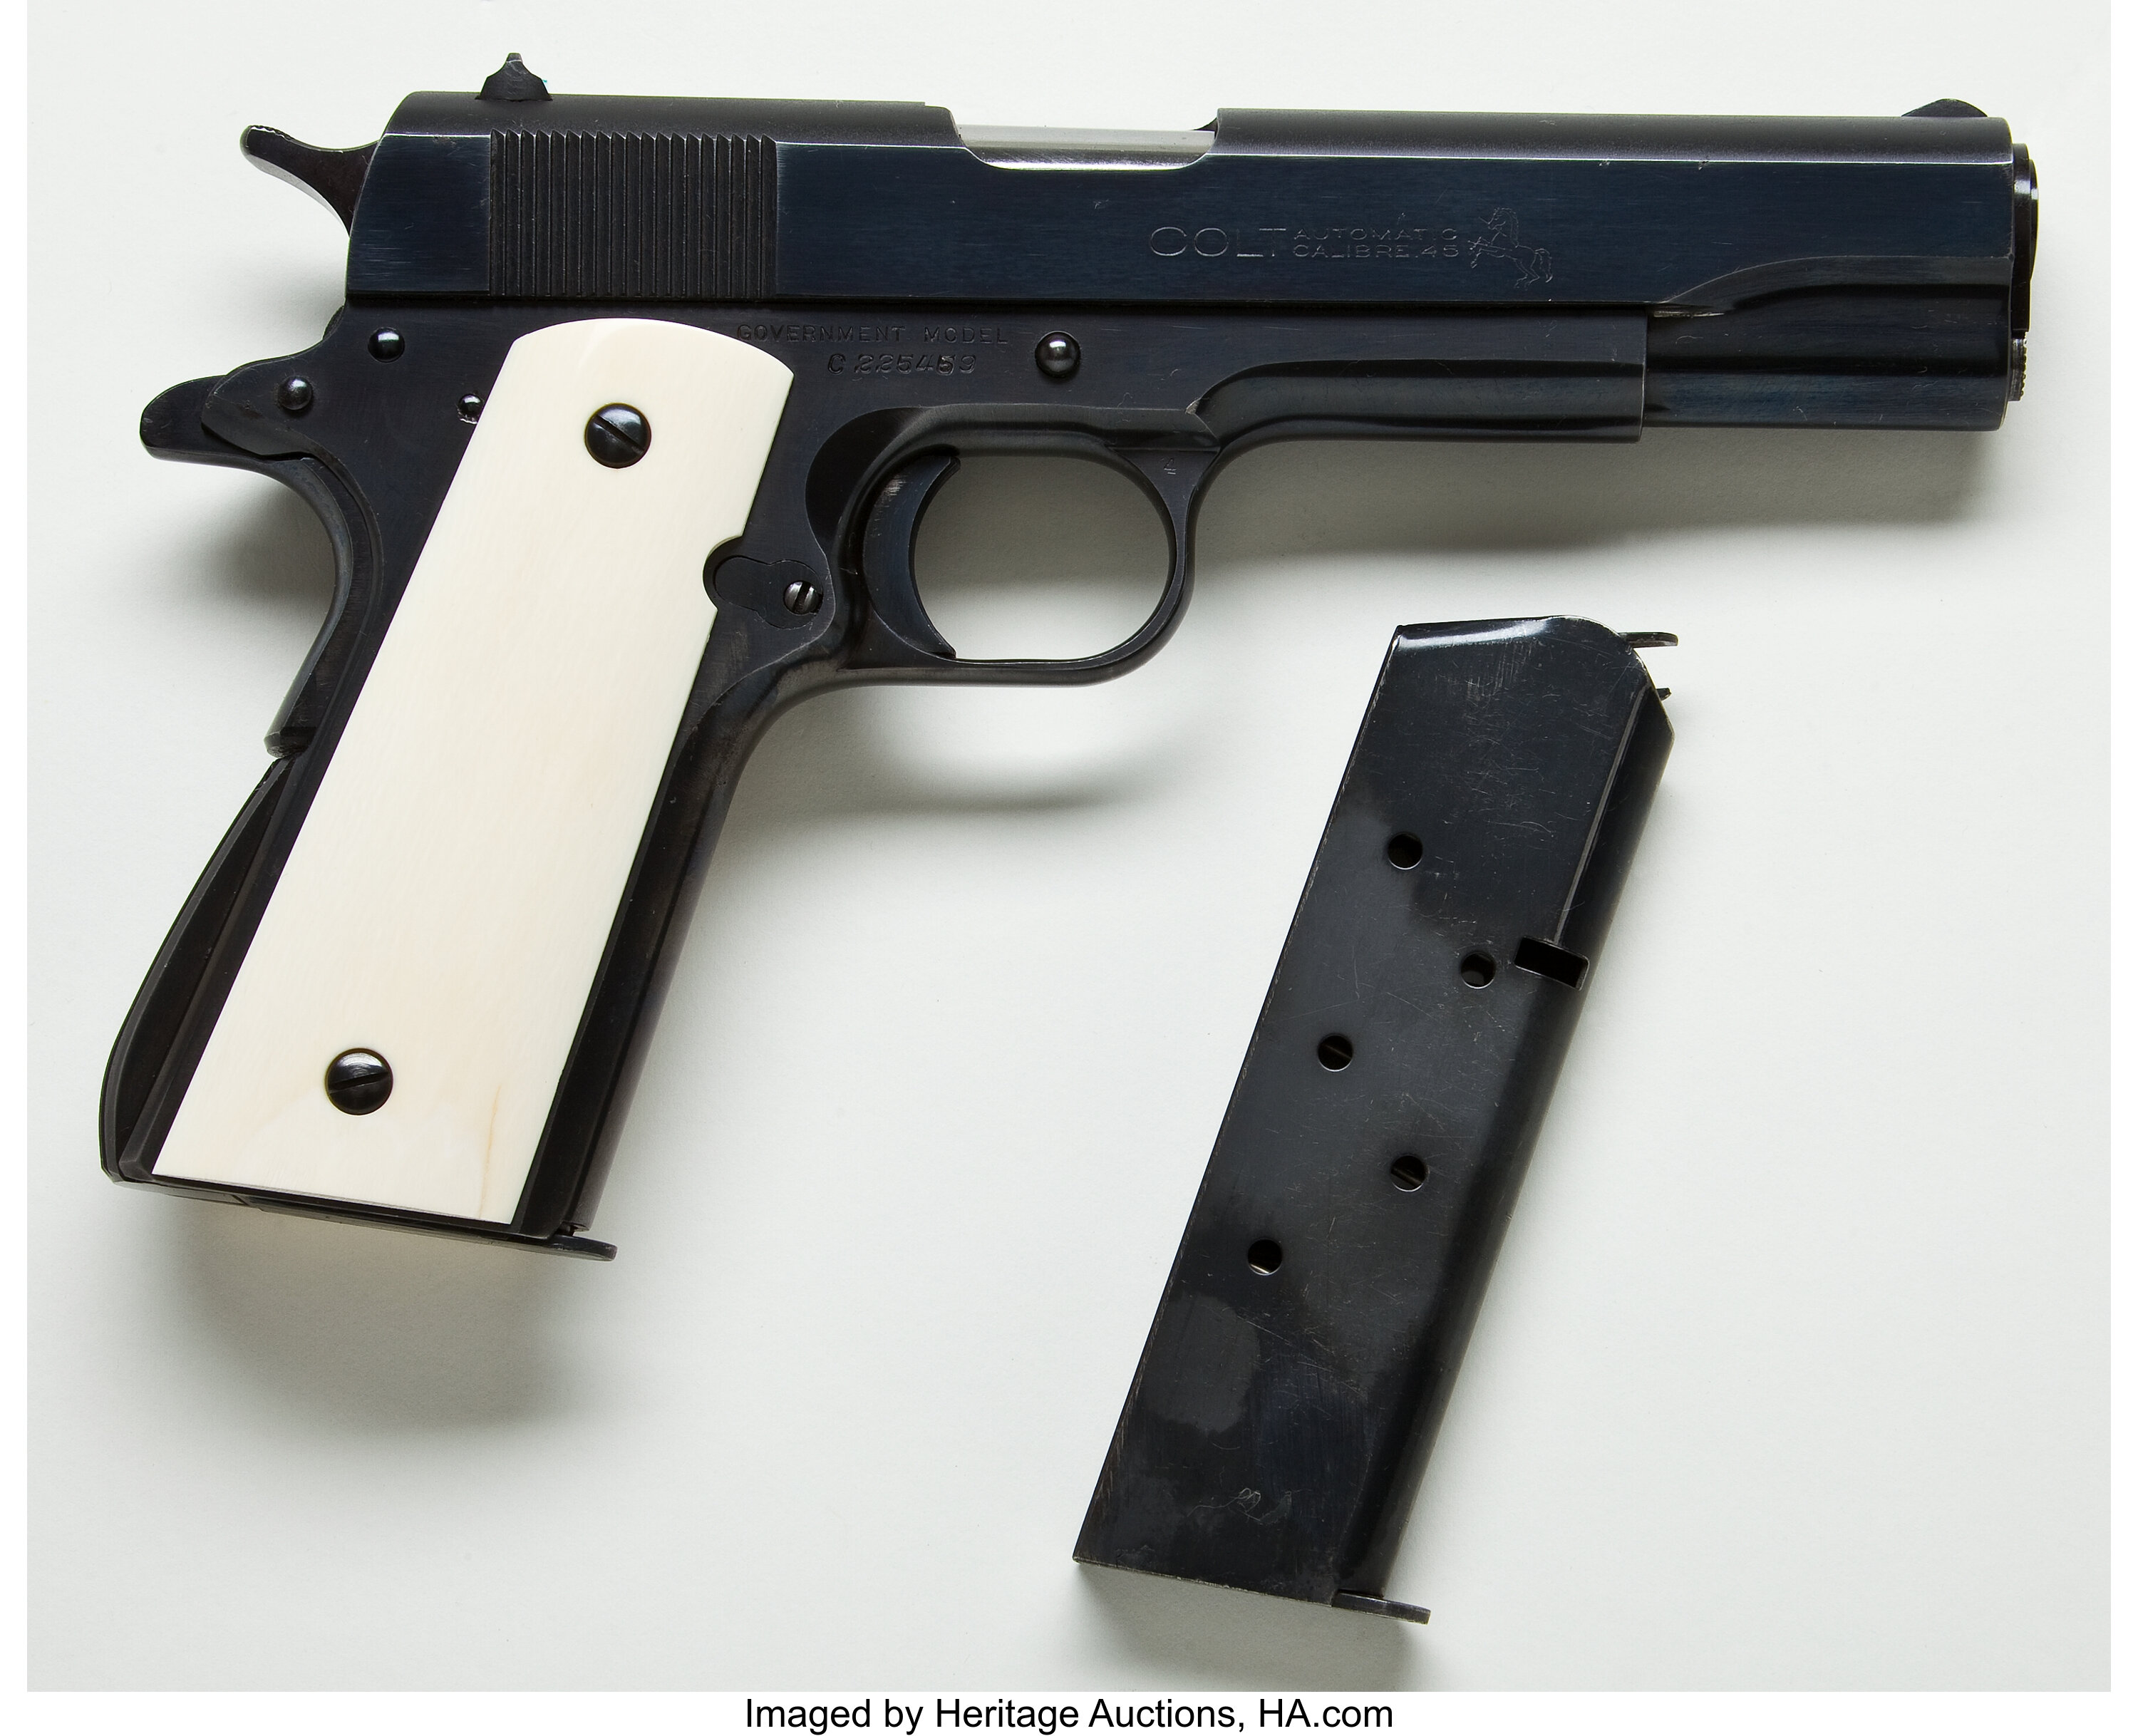 Cased Colt Commercial Government Model 1911-A1 Semi-Automatic, Lot #32370